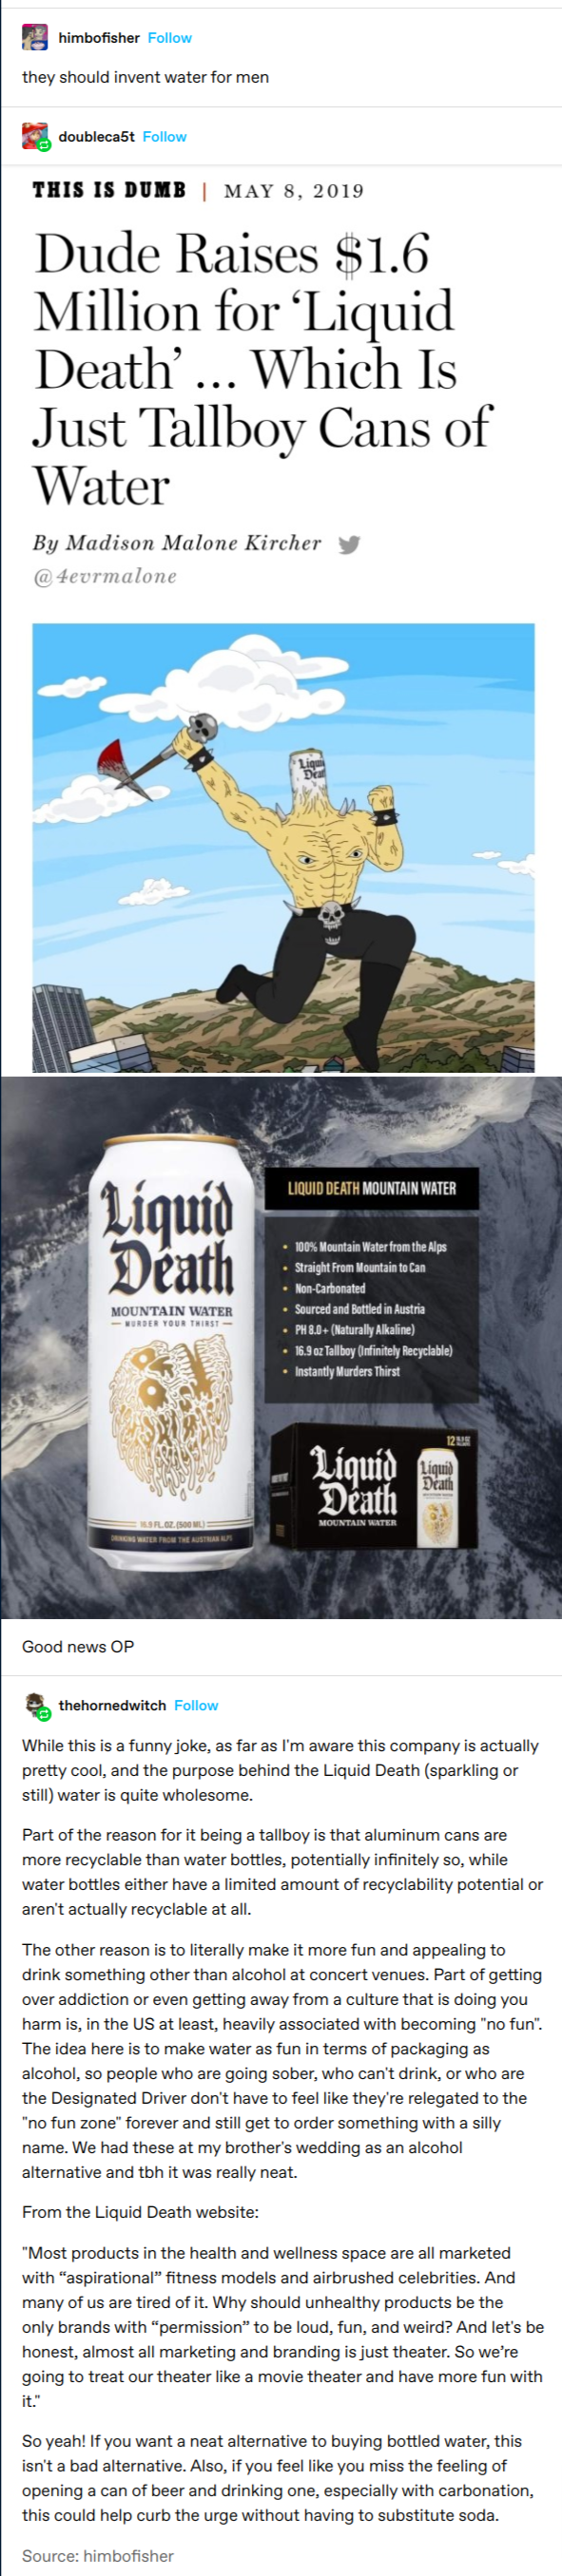 we drink what we like, and we like death!